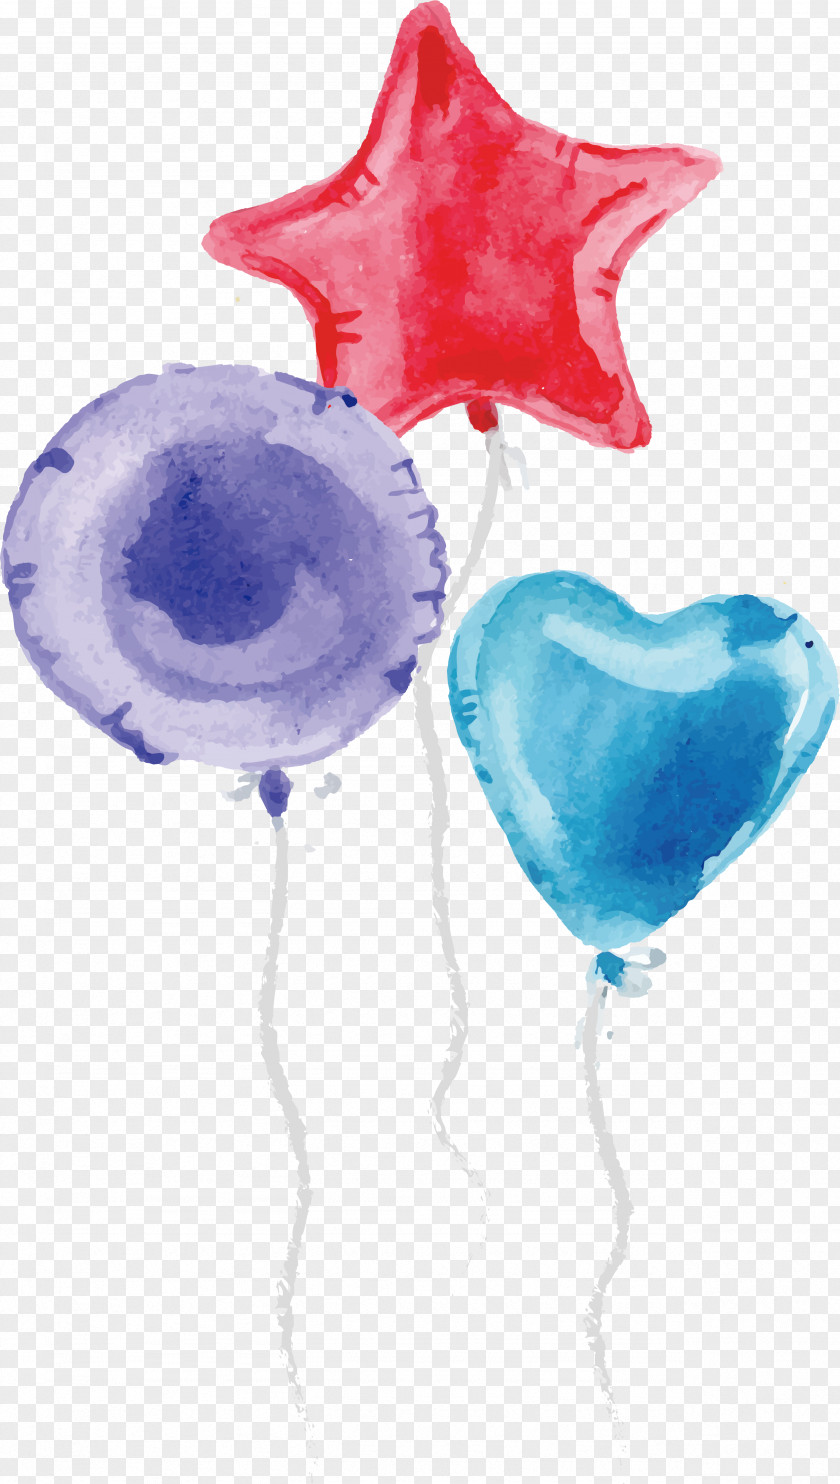 Watercolor Balloon Design Birthday Painting Party PNG